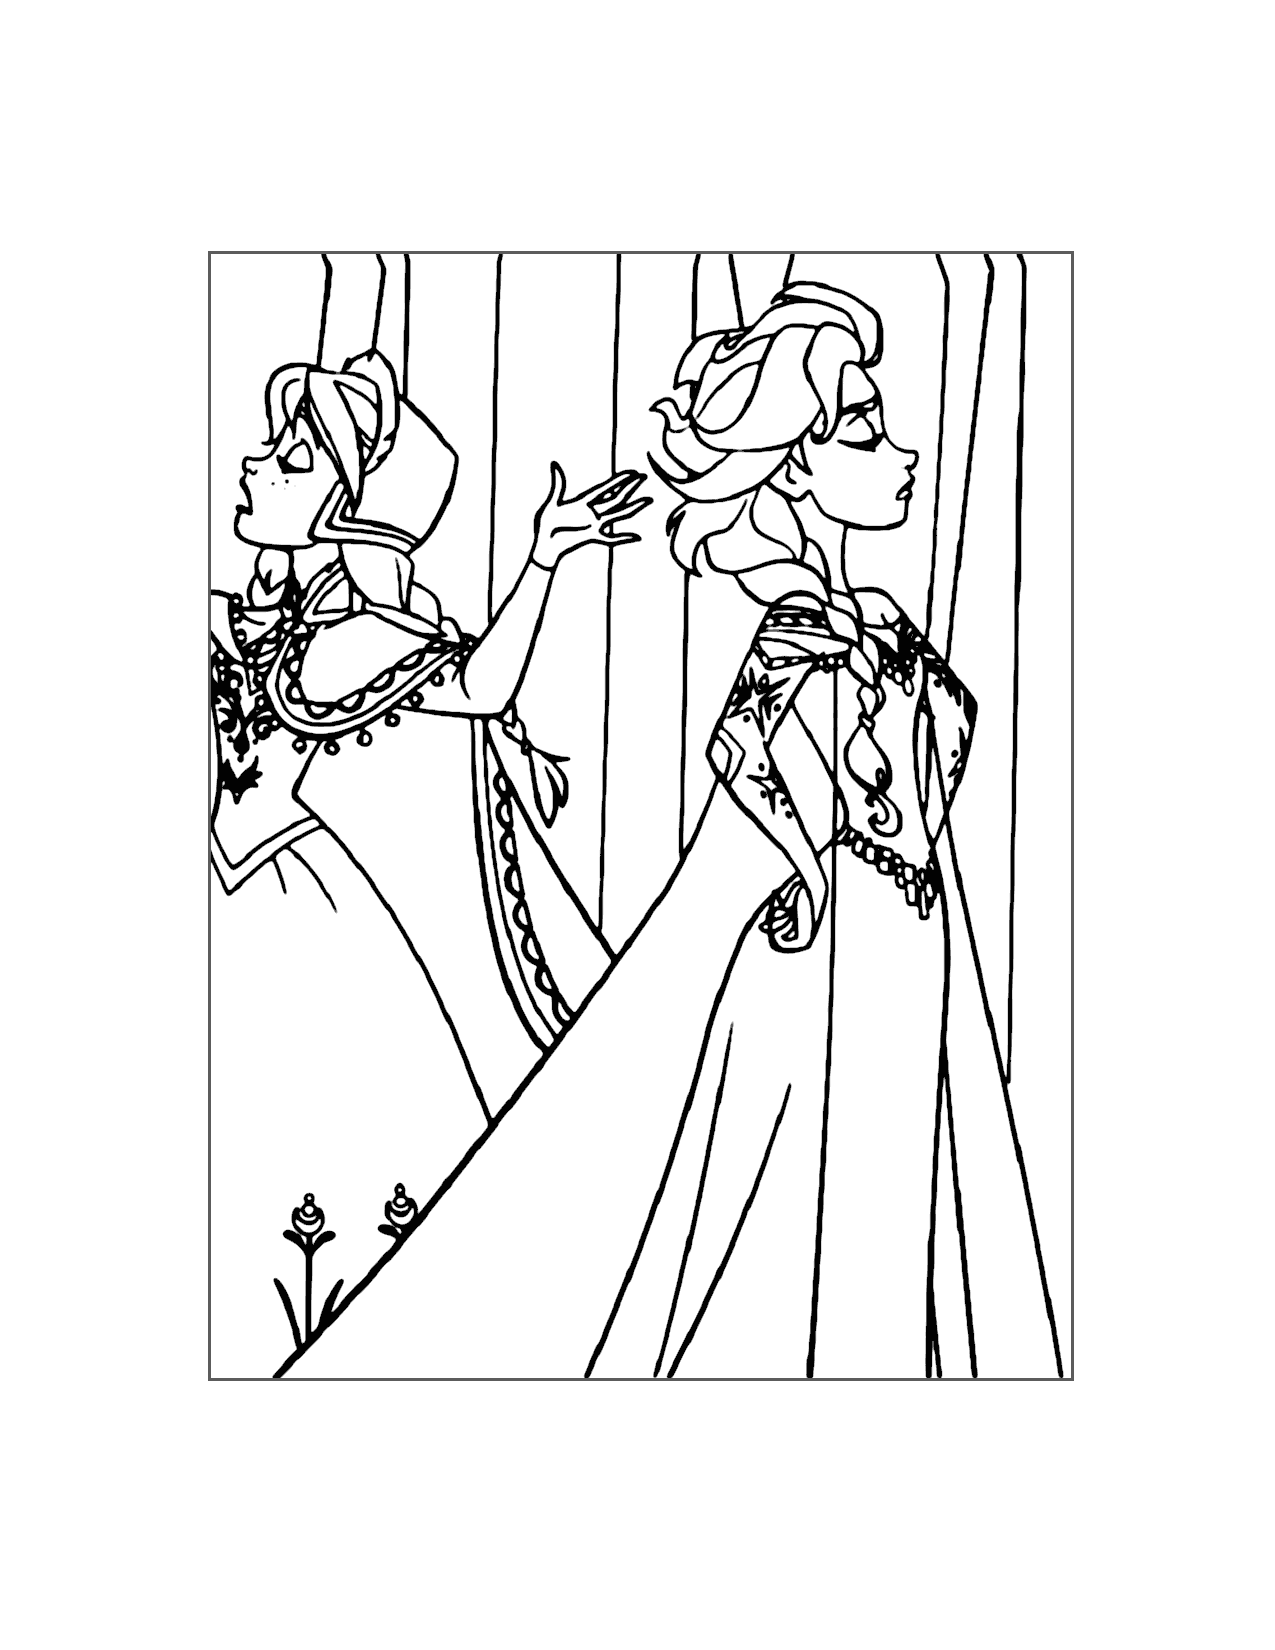 Anna And Elsa Argue Coloring Page